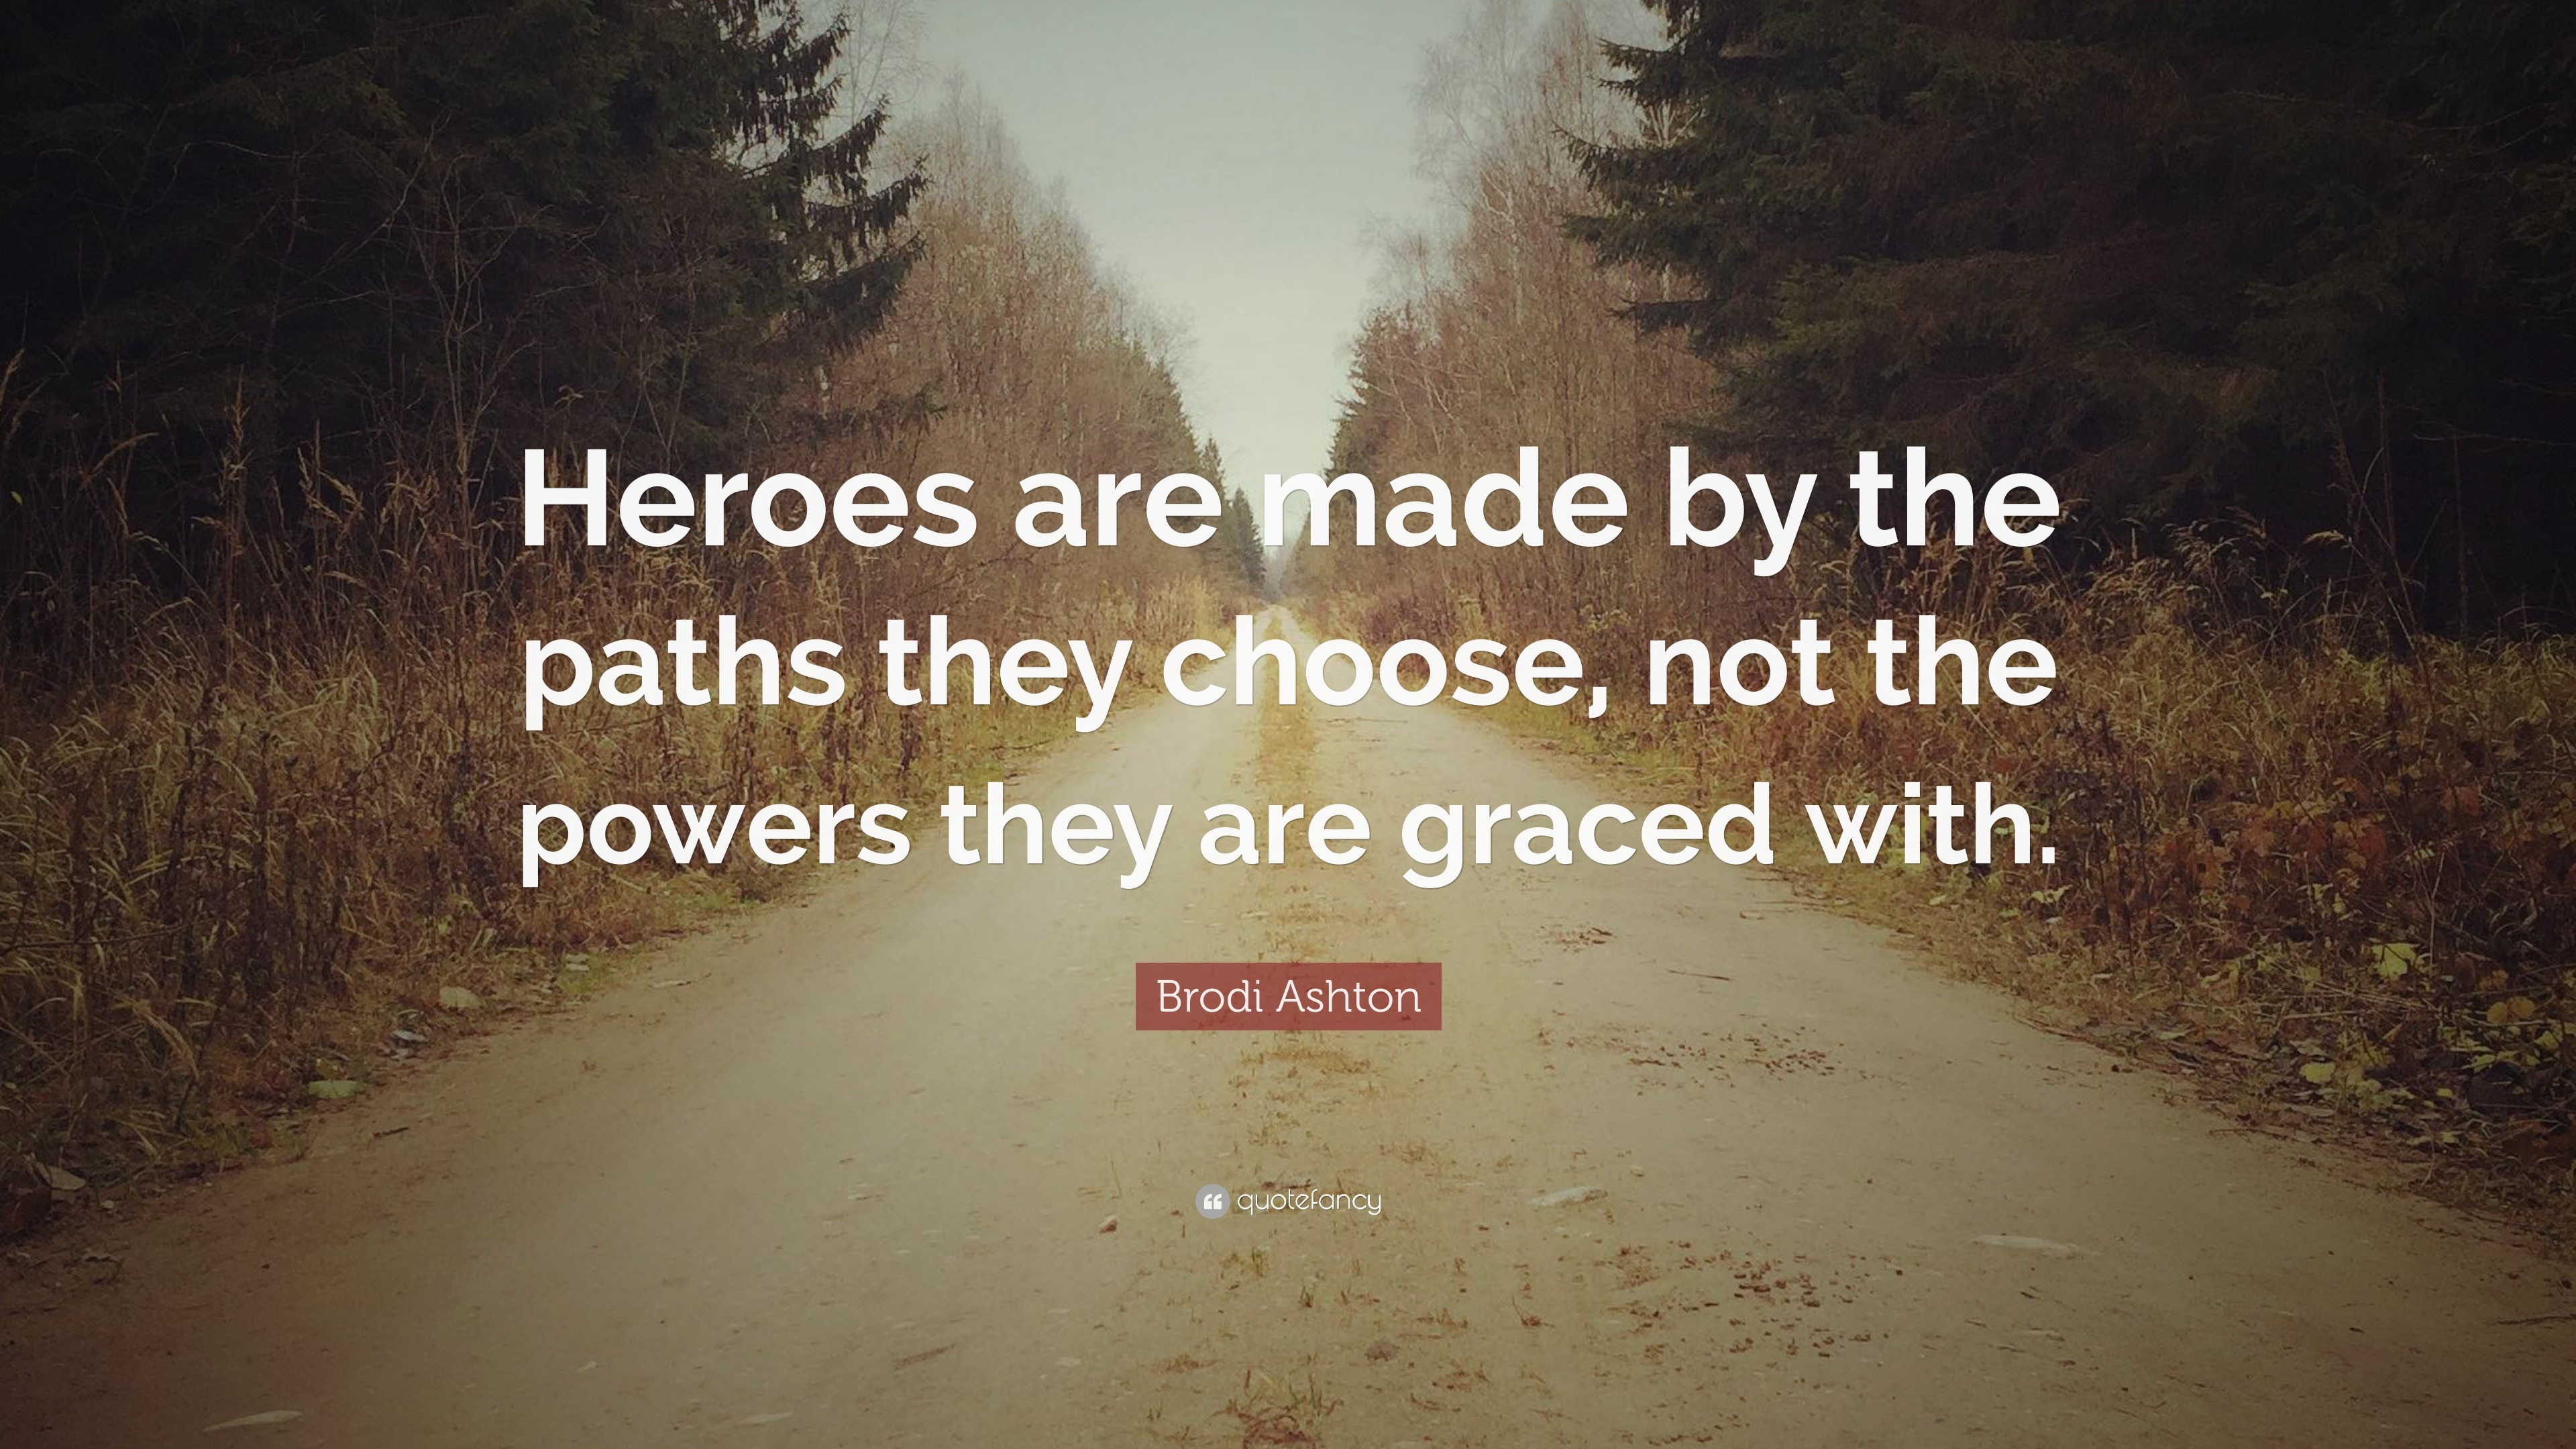 Brodi Ashton Quote: “Heroes are made by the paths they choose, not the ...